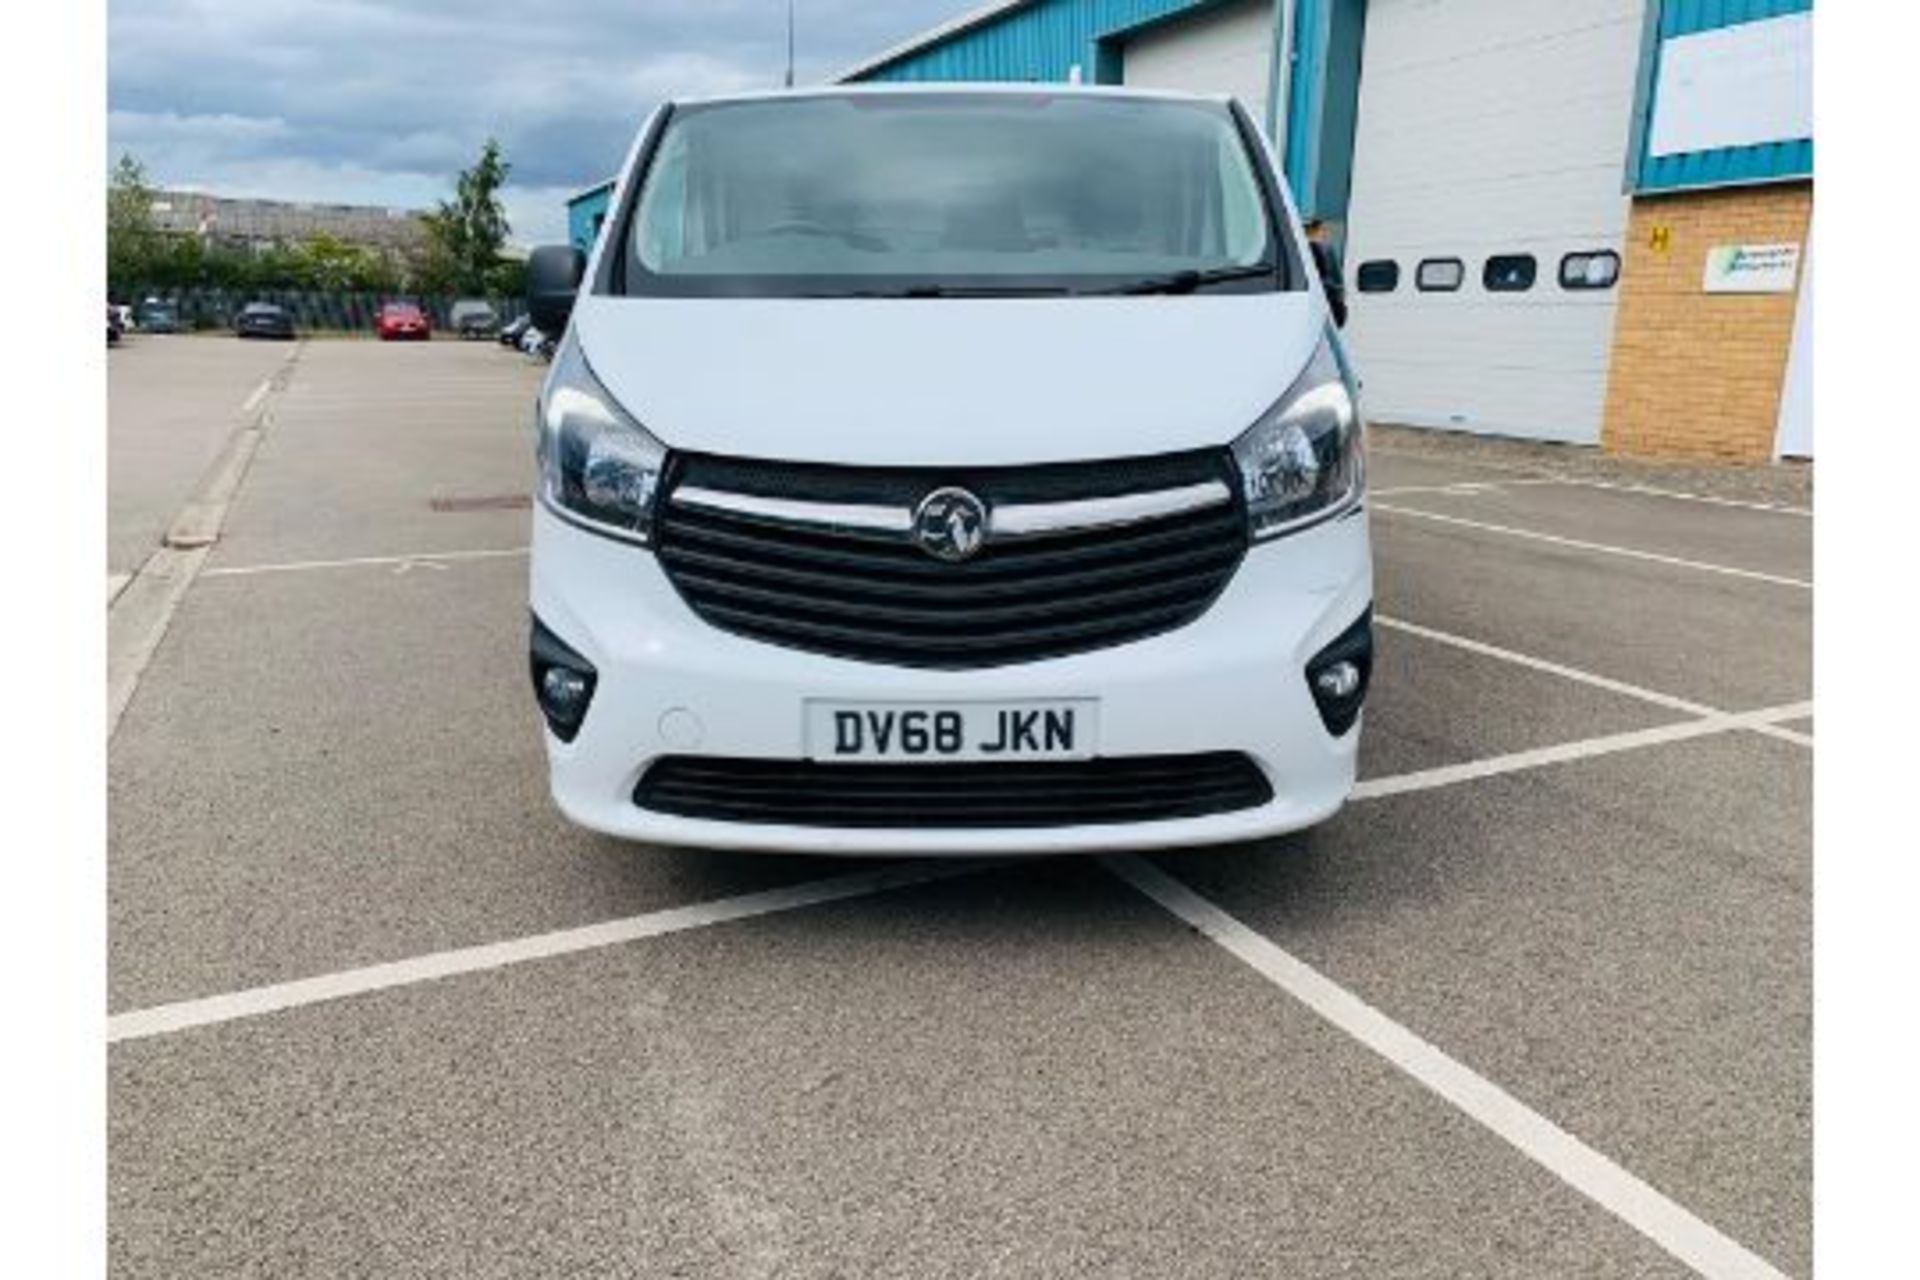 Vauxhall Vivaro 2900 1.6 CDTI Sportive - 2019 Model - 6 Speed - Air Con - Cruise - ONLY 25K Miles - Image 7 of 24